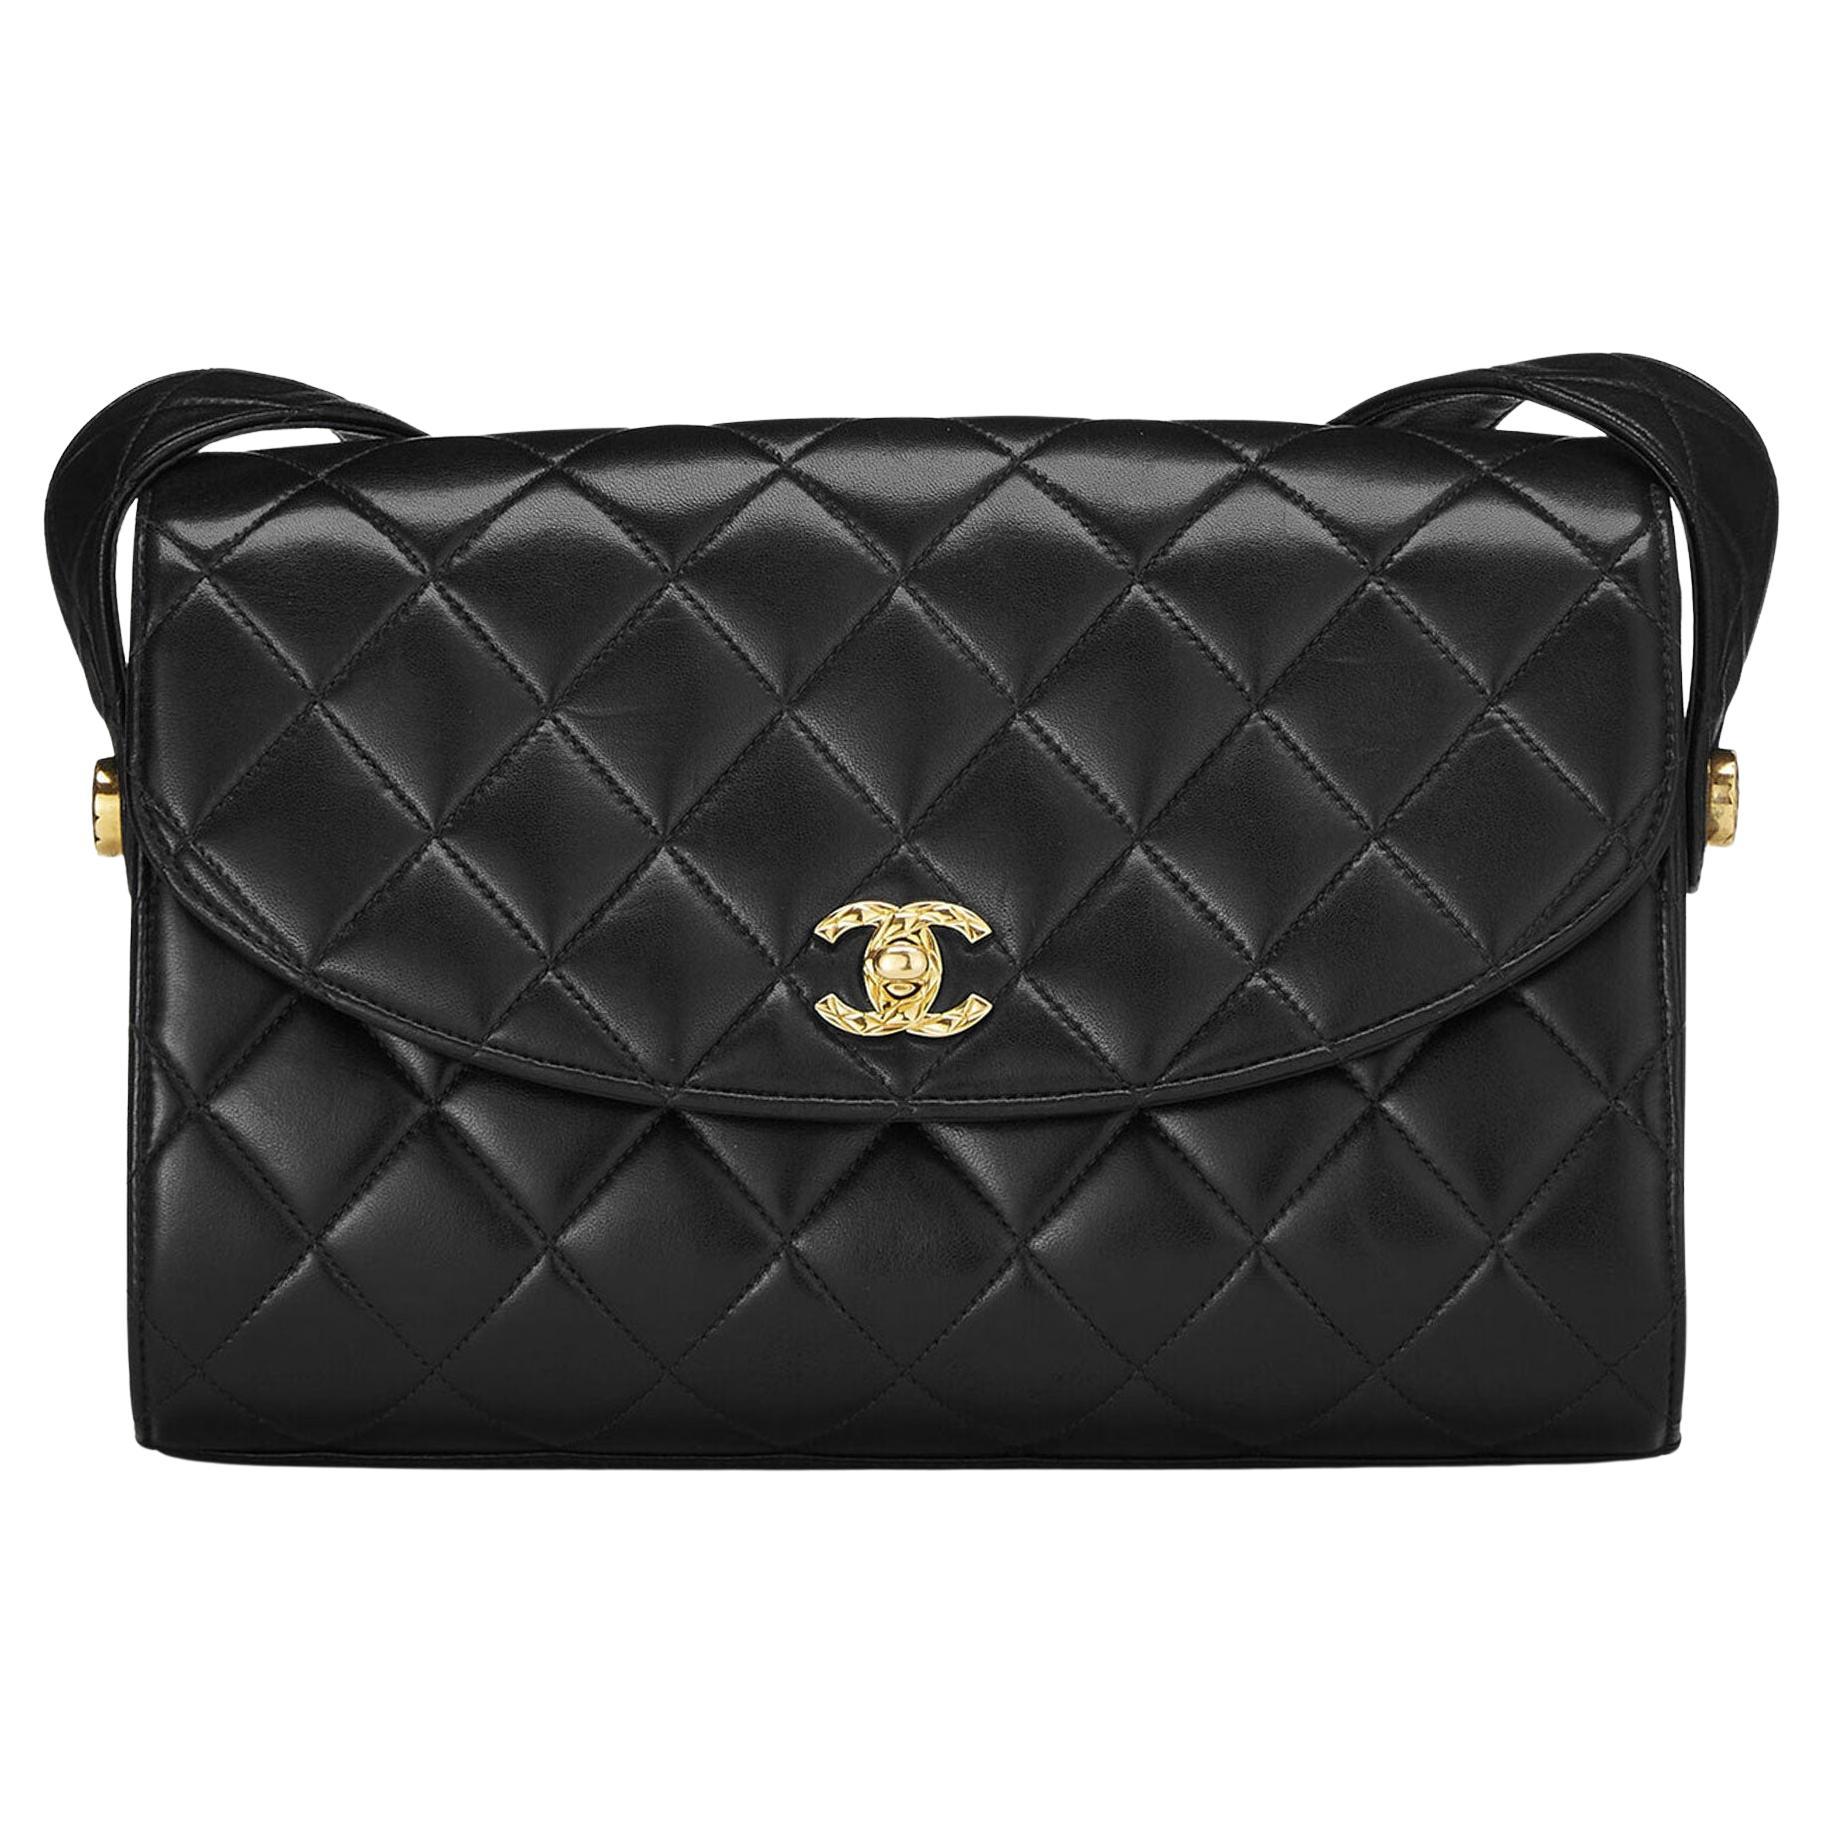 Chanel 1991 Vintage Classic Flap Rare Quilted Black Lambskin Shoulder Bag In Good Condition For Sale In Miami, FL